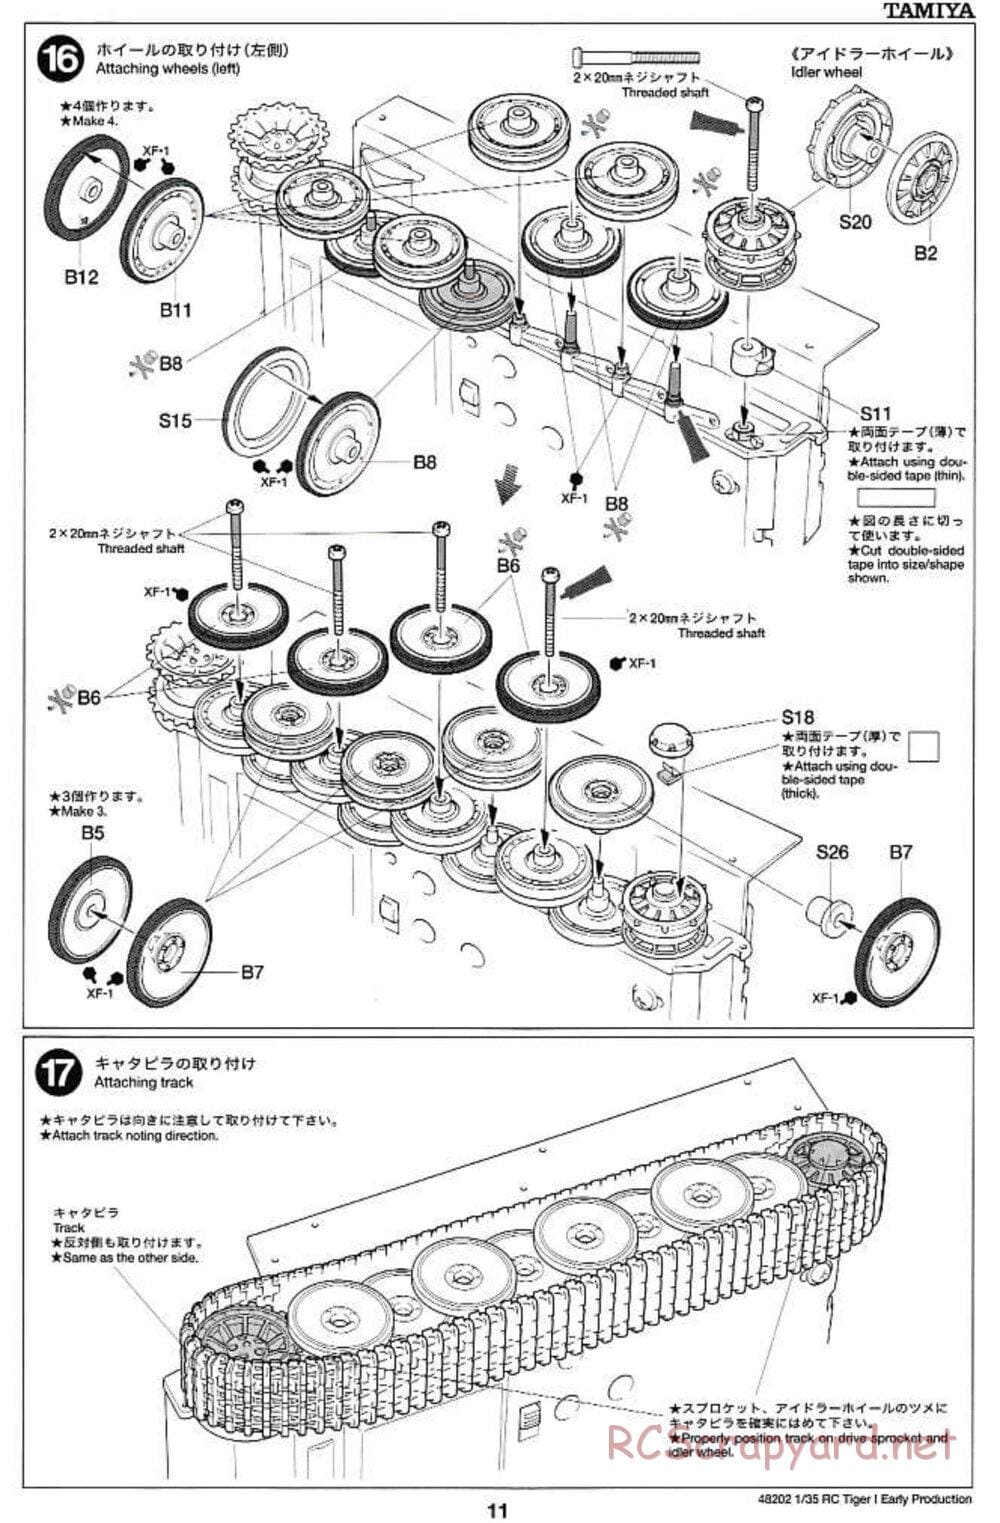 Tamiya - German Tiger 1 Early Production - 1/35 Scale Chassis - Manual - Page 11